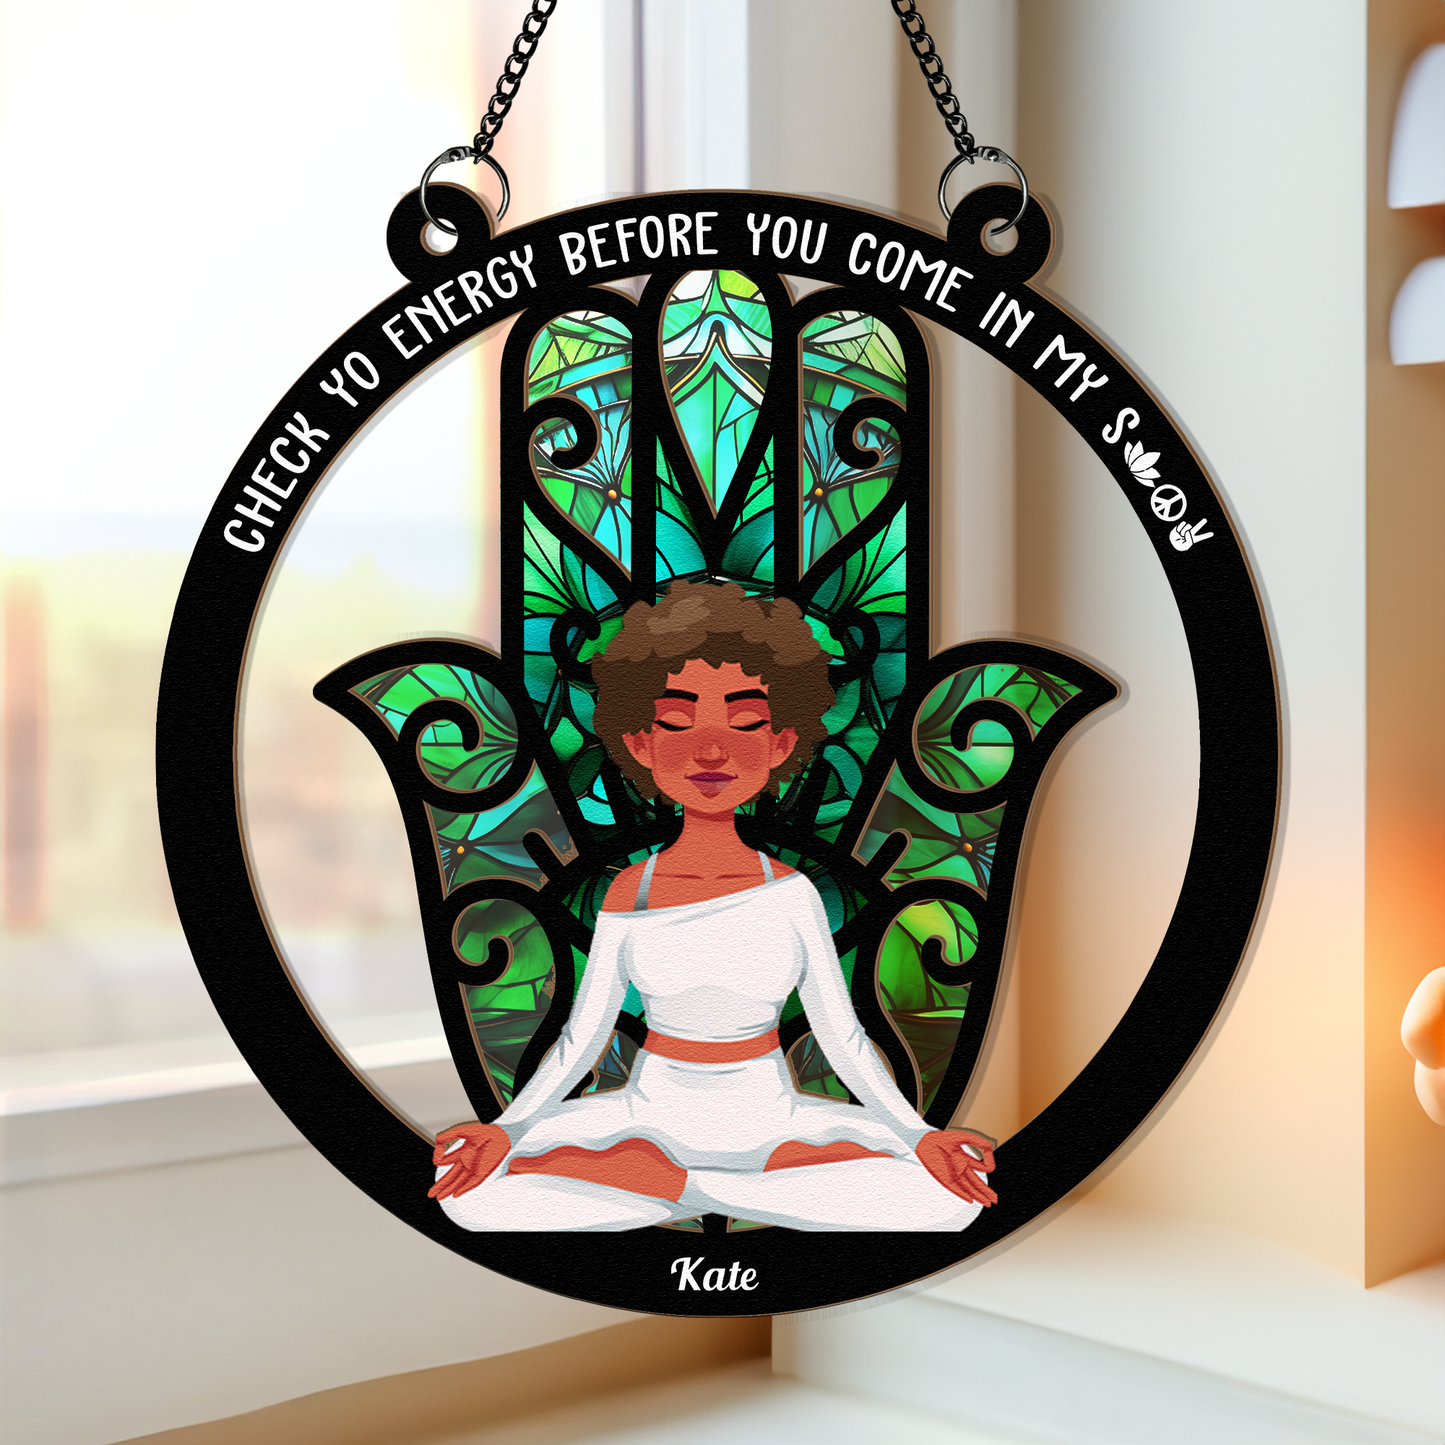 Please Be Mindful Of The Energy - Personalized Window Hanging Suncatcher Ornament